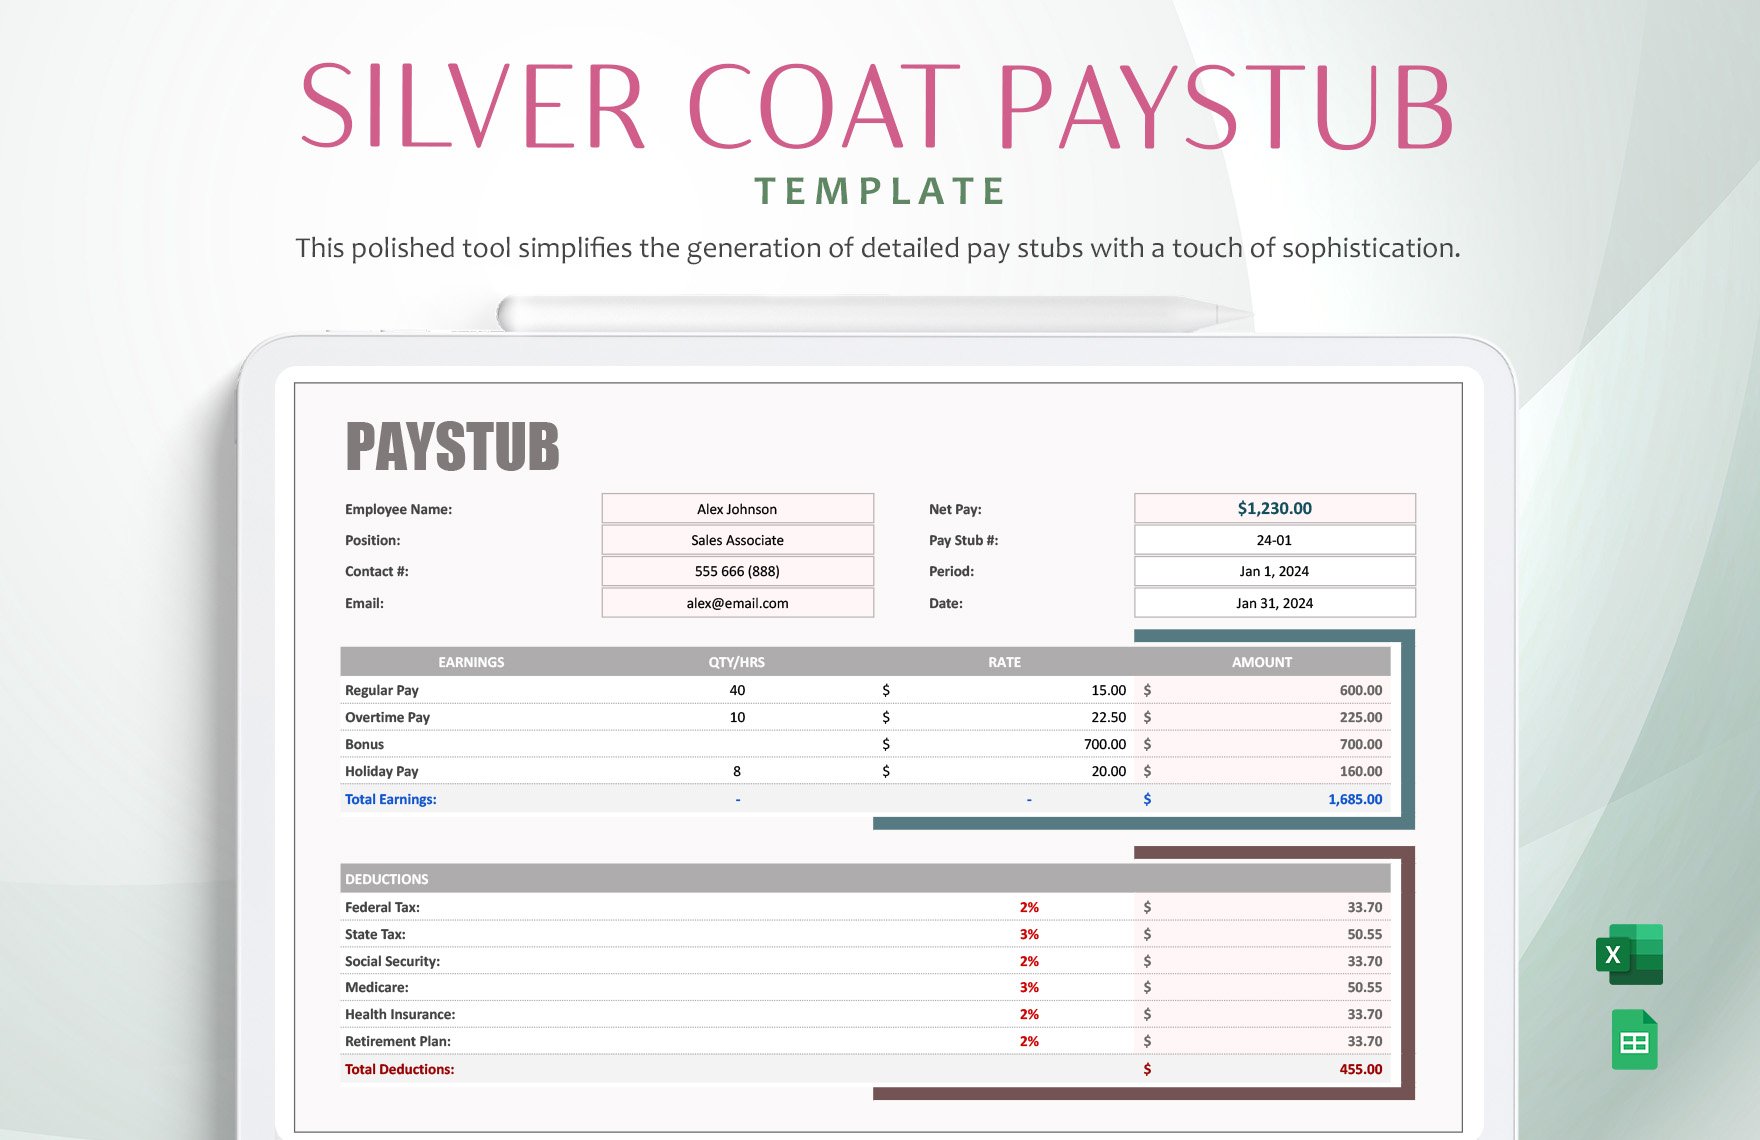 Silver Coat Paystub Template in Excel, Google Sheets